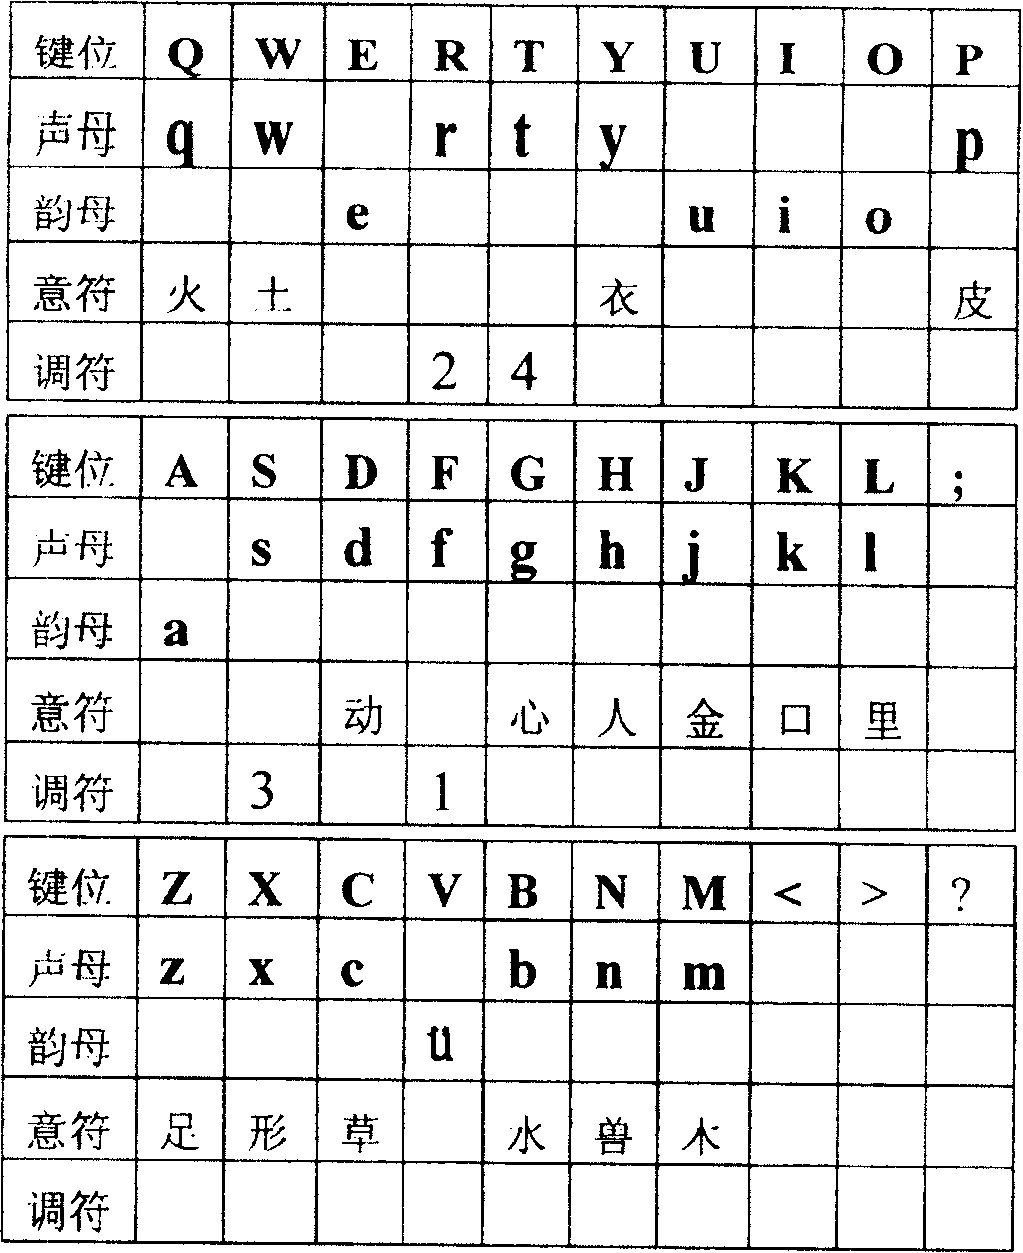 Chinese character input method of initial consonant, simple or compound vowel, ideograph and tone coded